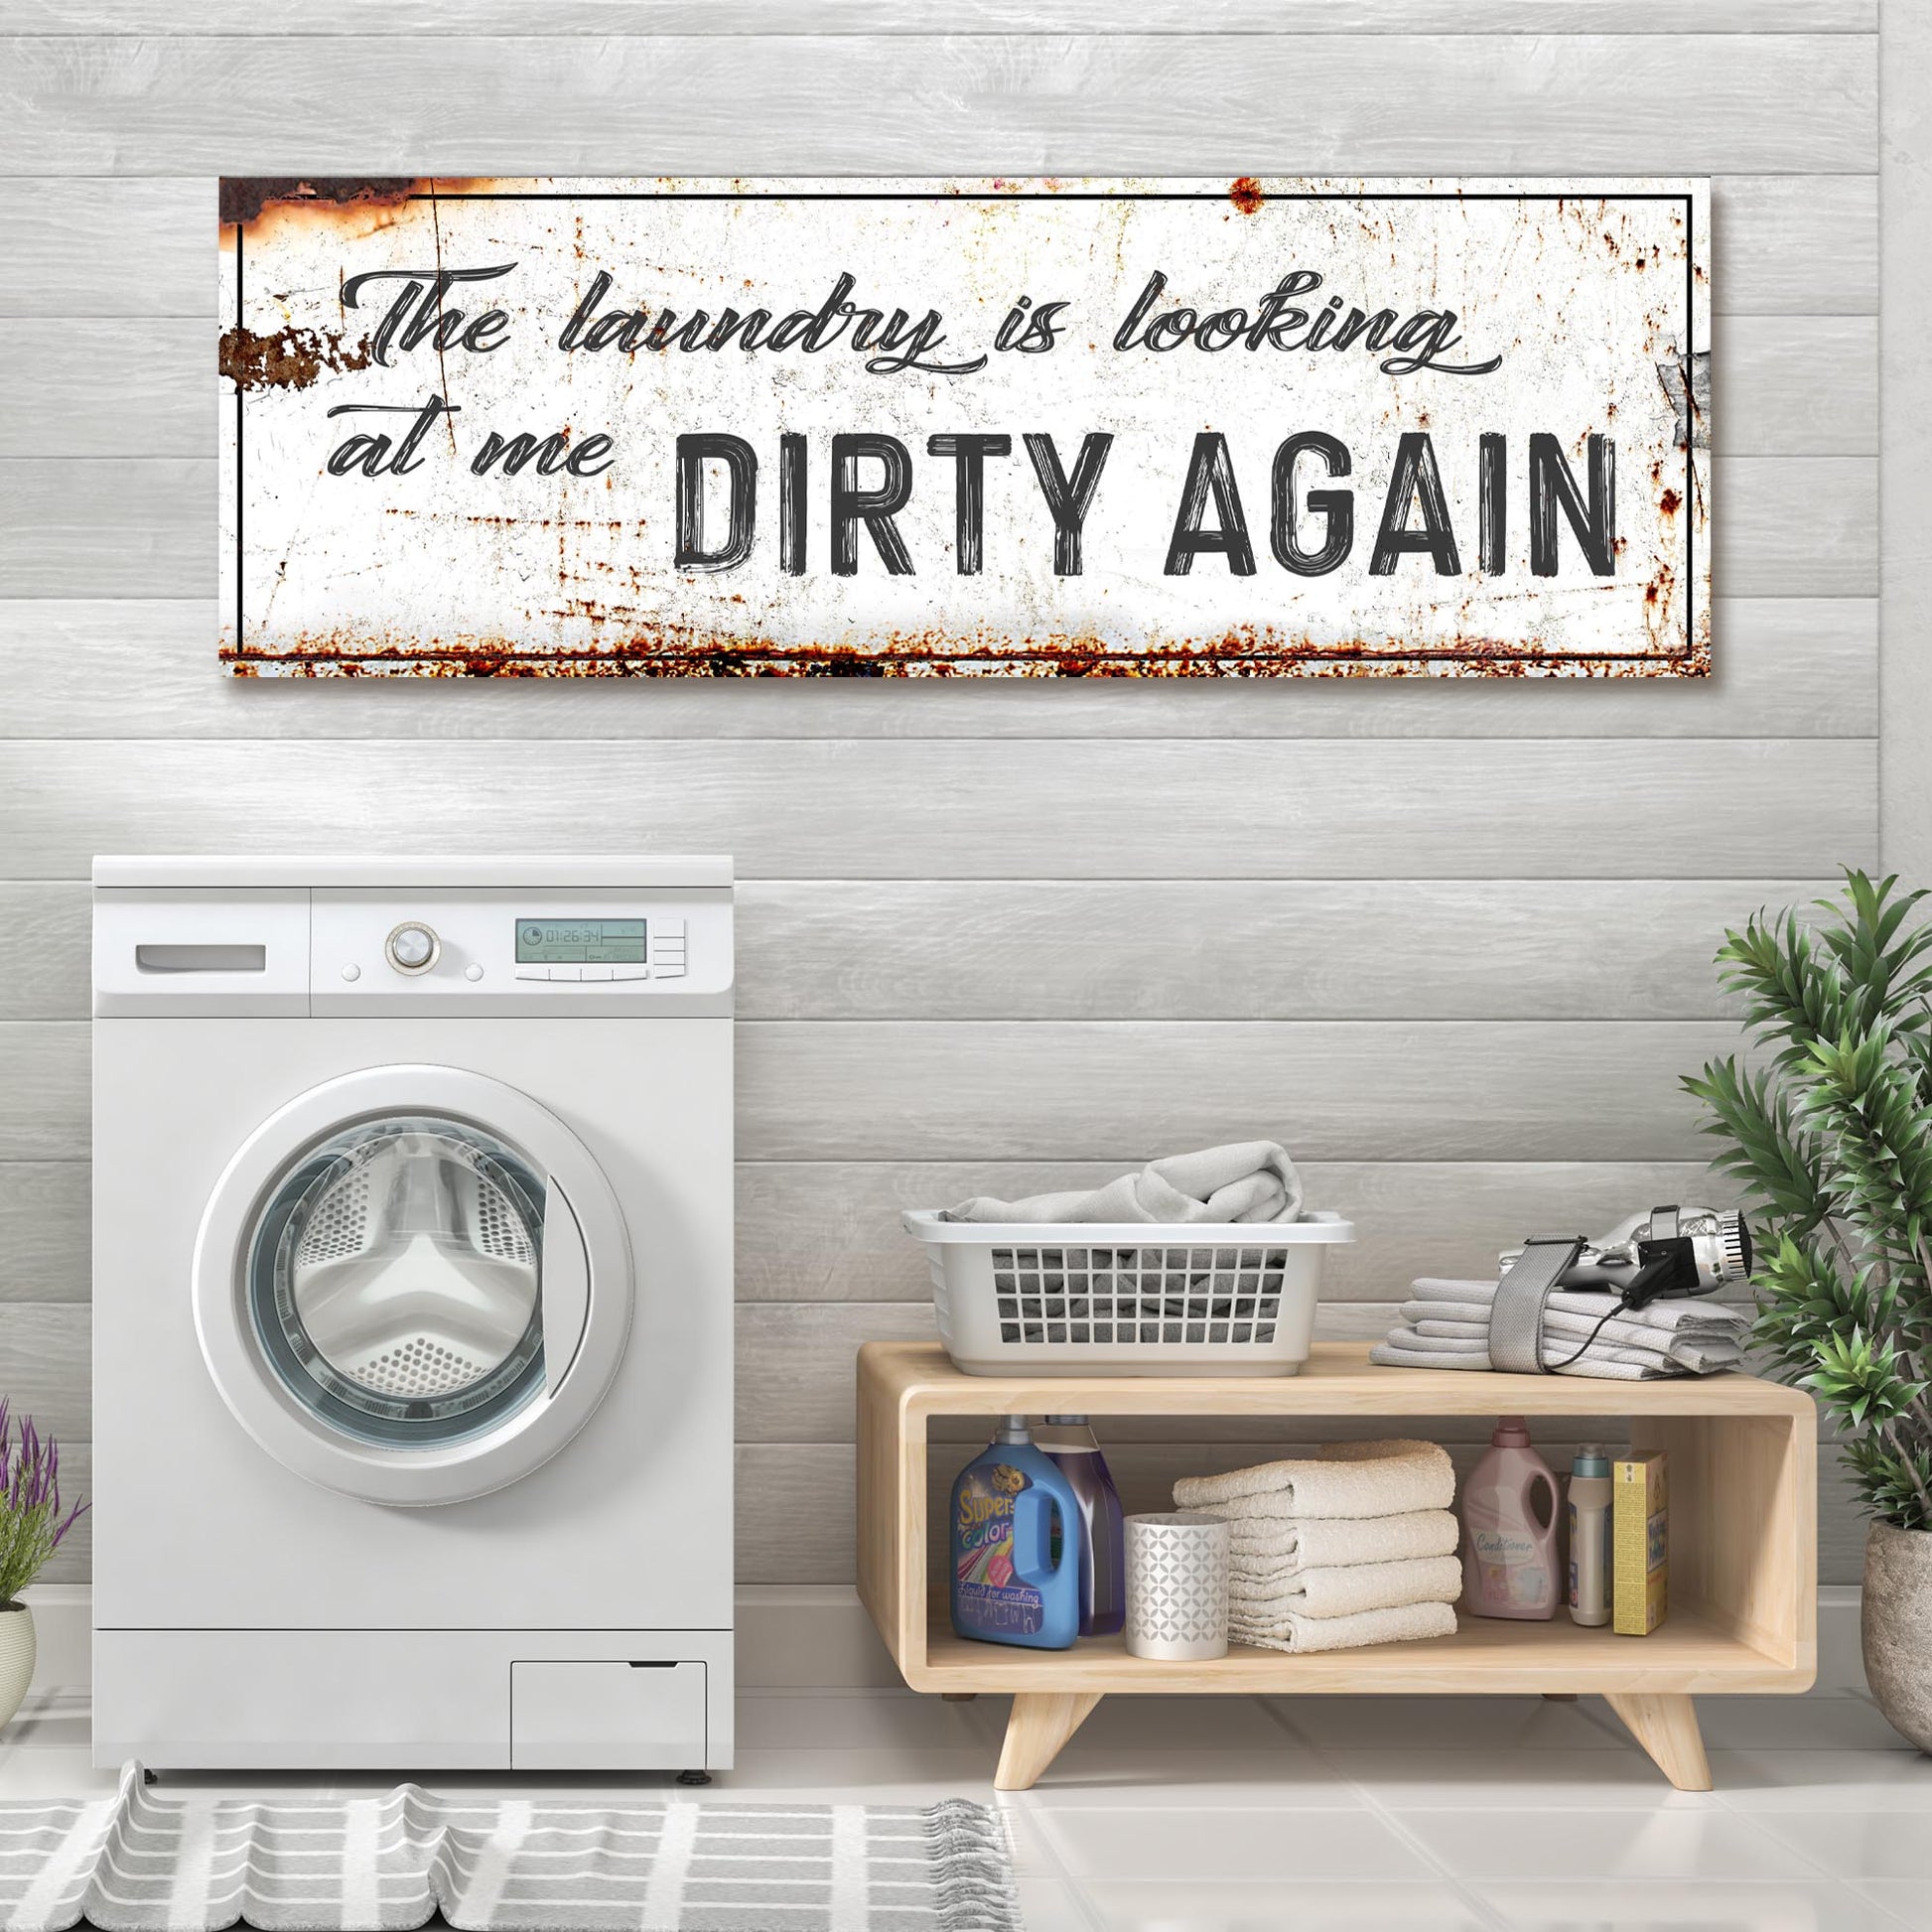 Dirty Laundry Sign - Image by Tailored Canvases